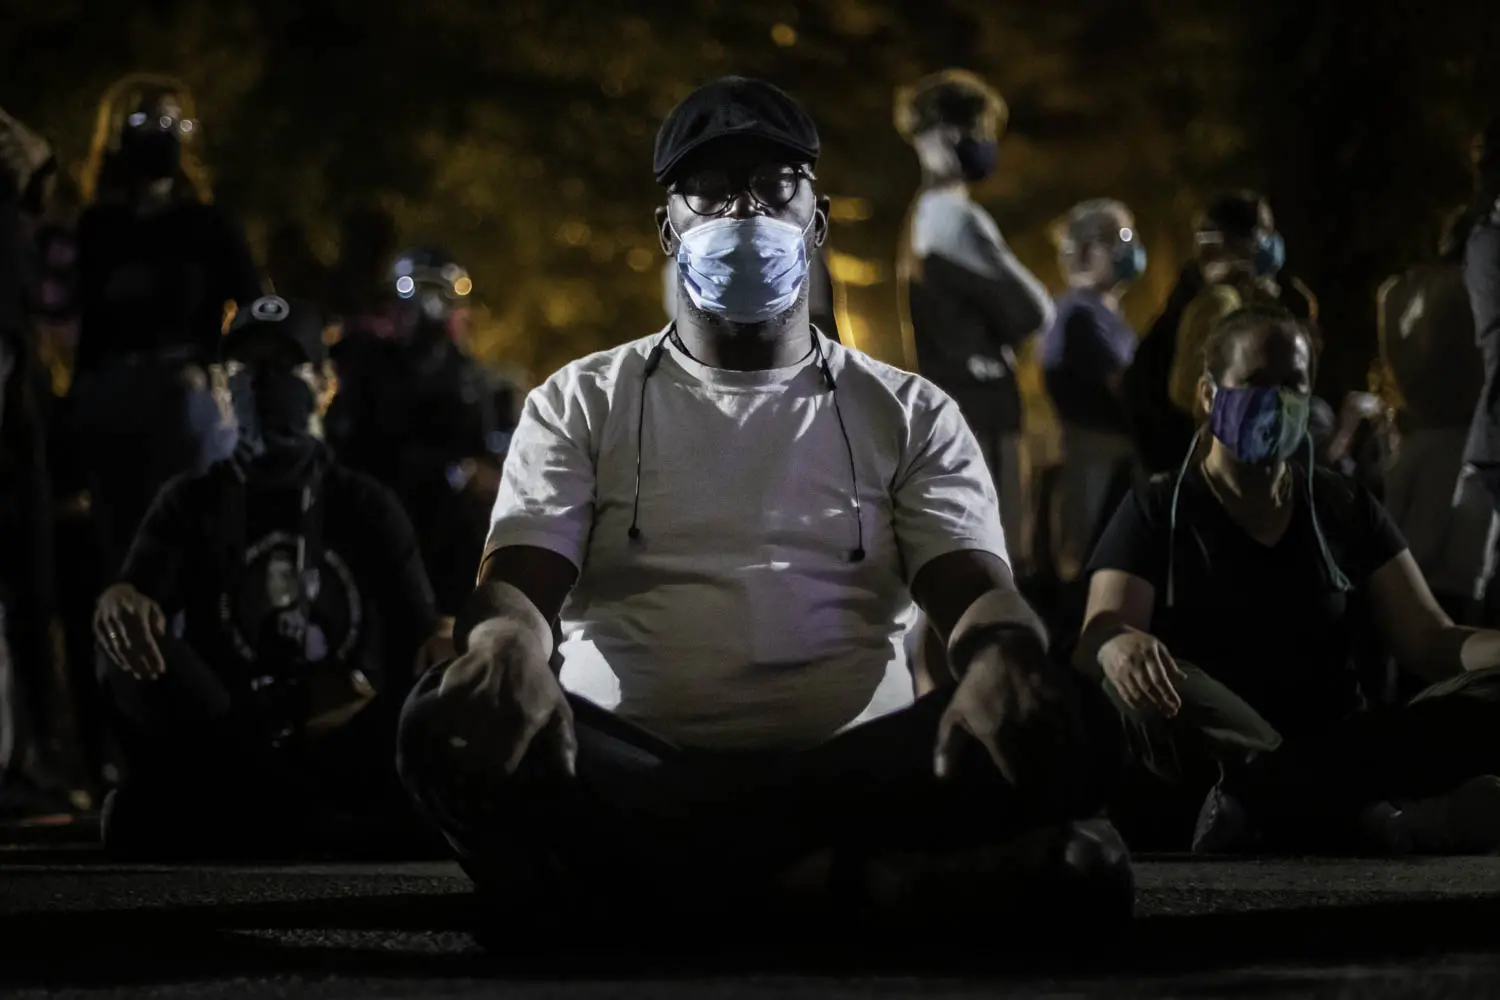 A man wearing a medical face mask sits on the ground alongside others.